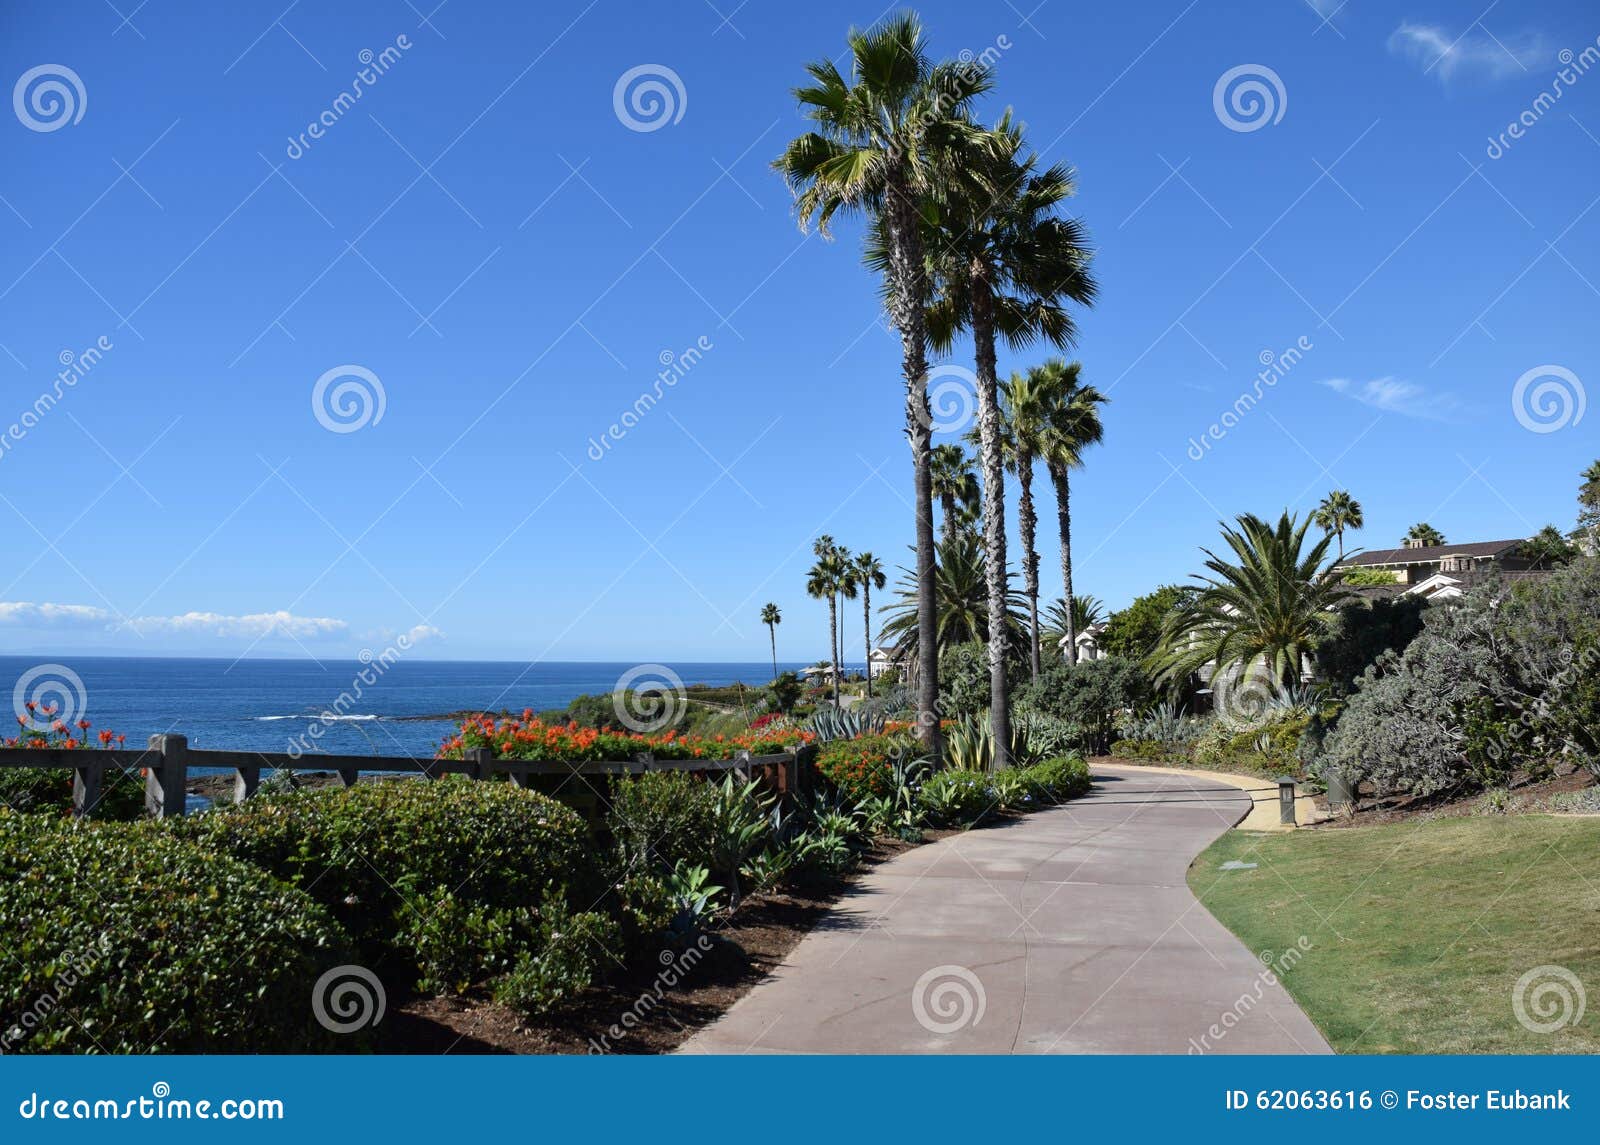 montage resort park and public access walkway in south laguna beach, california.